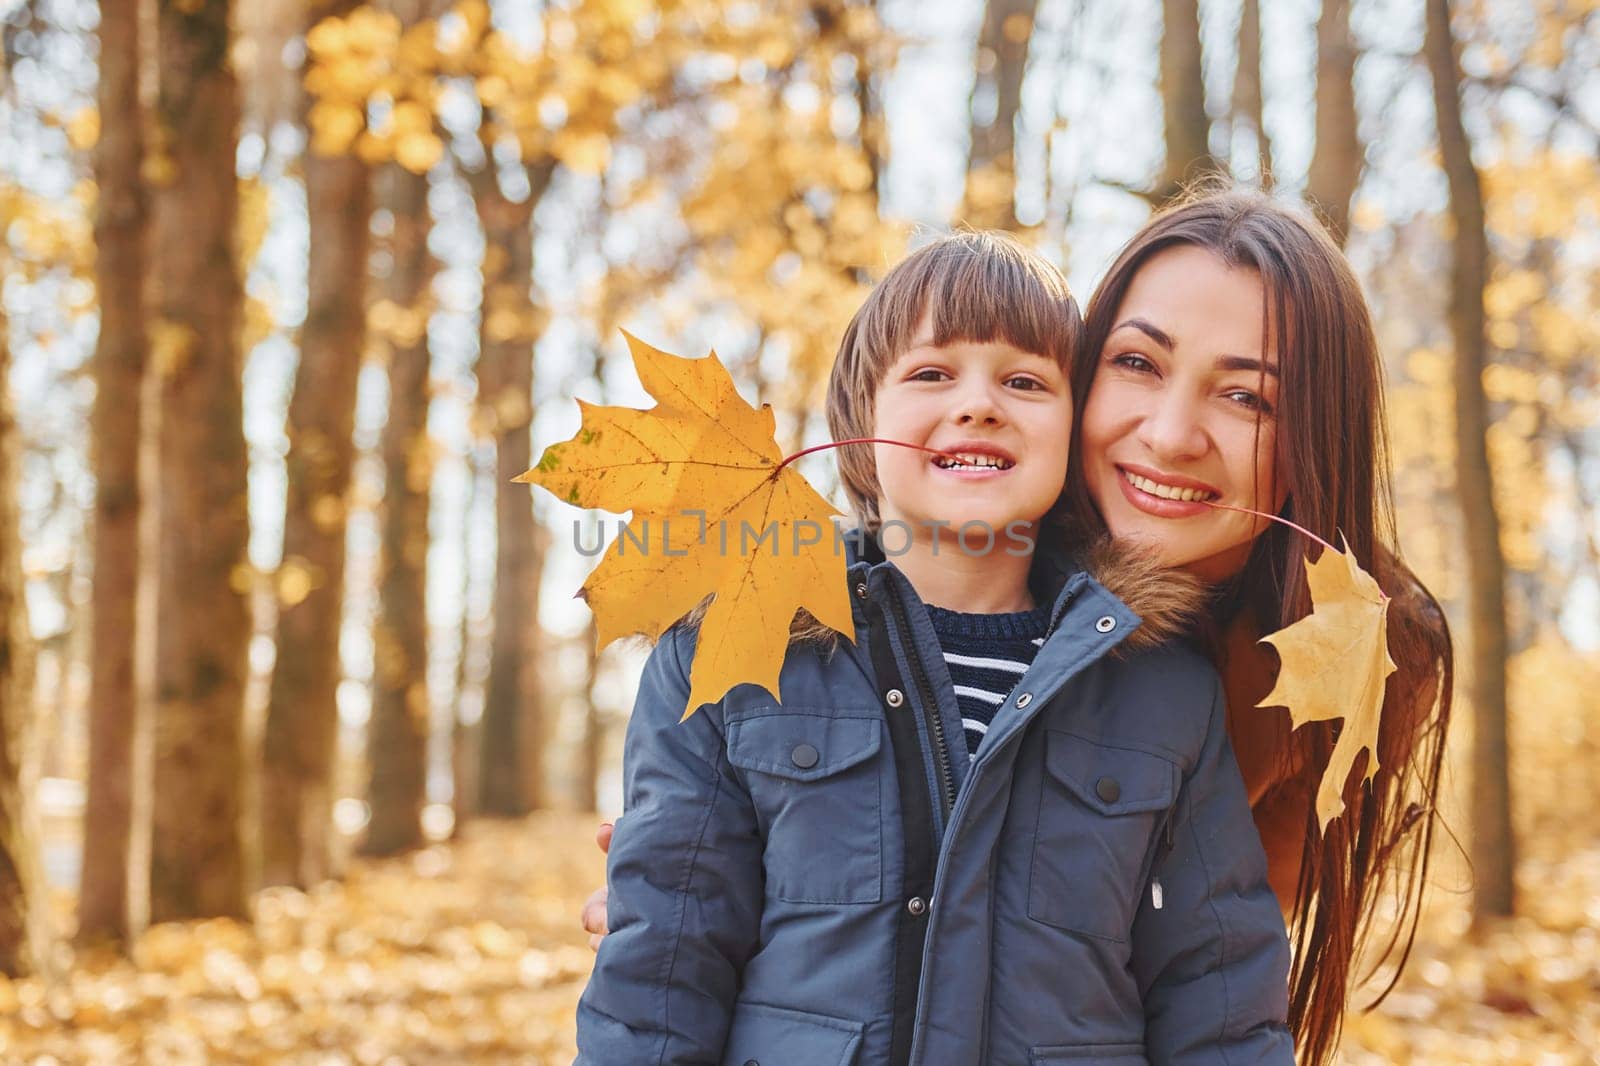 Mother with her son is having fun outdoors in the autumn forest.